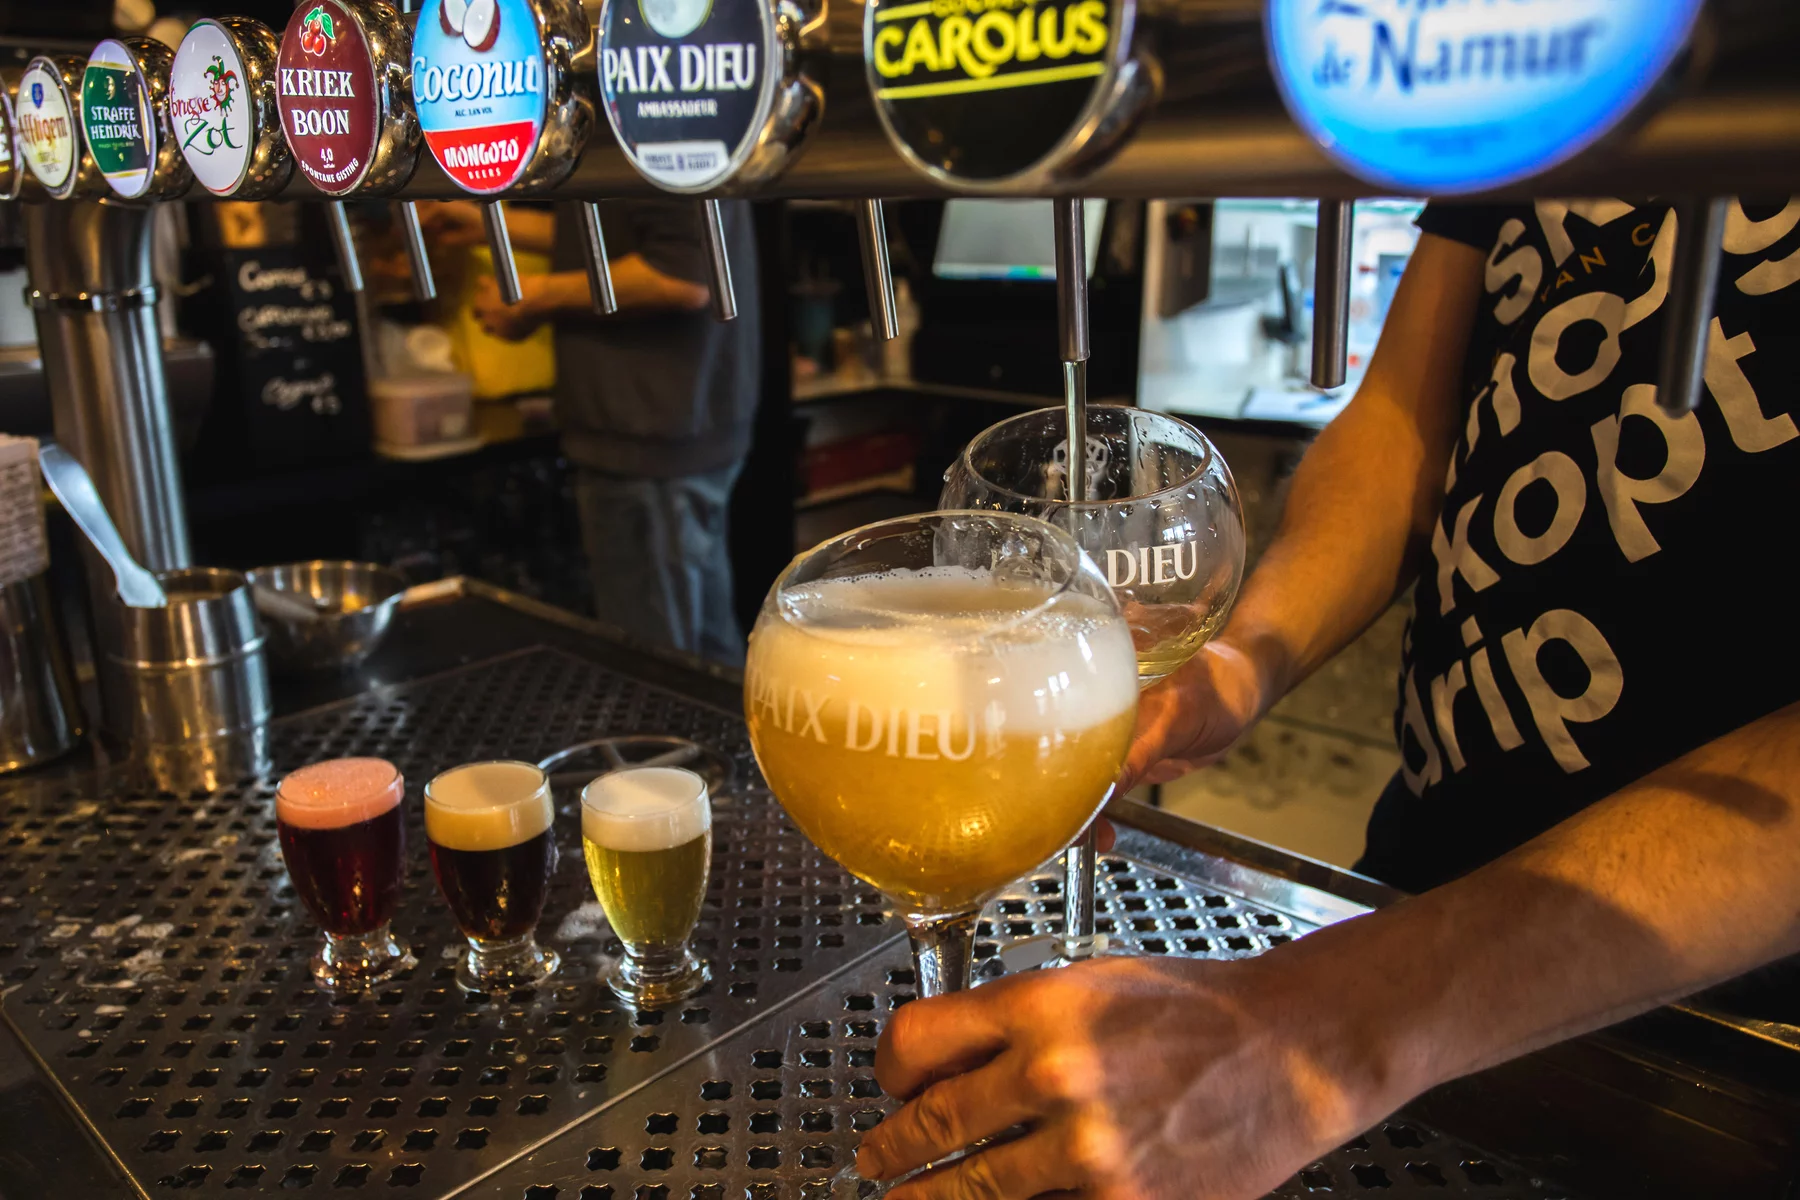 A variety of Belgian beers on draught